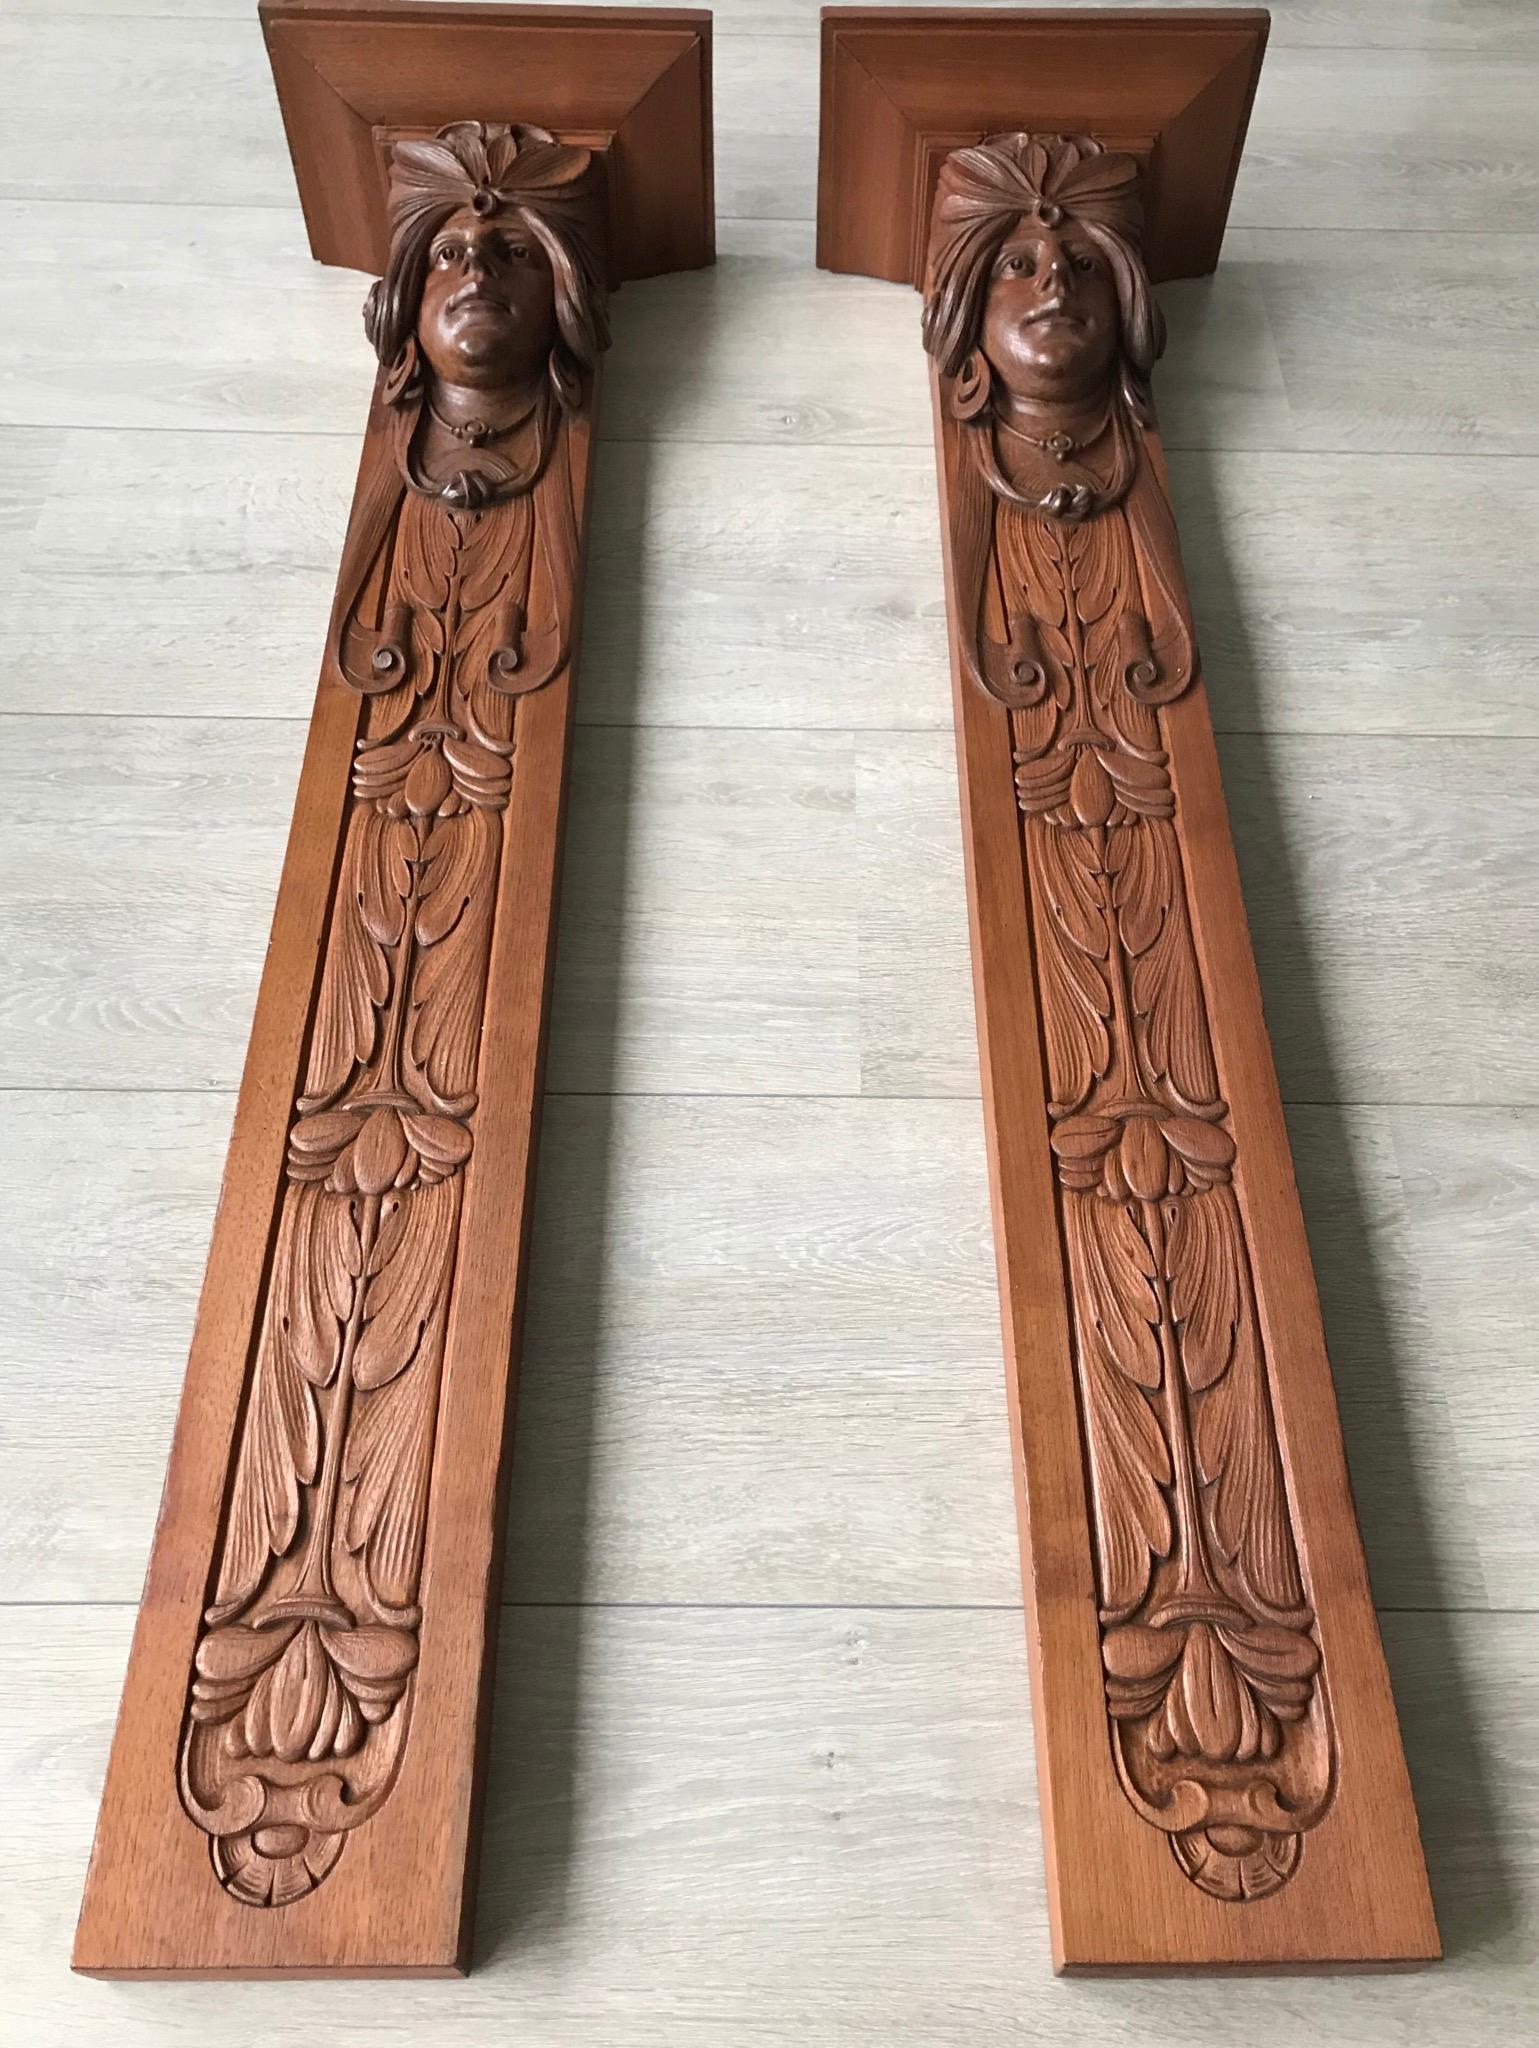 Hand-Carved Large and Amazing Pair of Art Nouveau Maharaja Sculpture Wall Brackets / Shelves For Sale